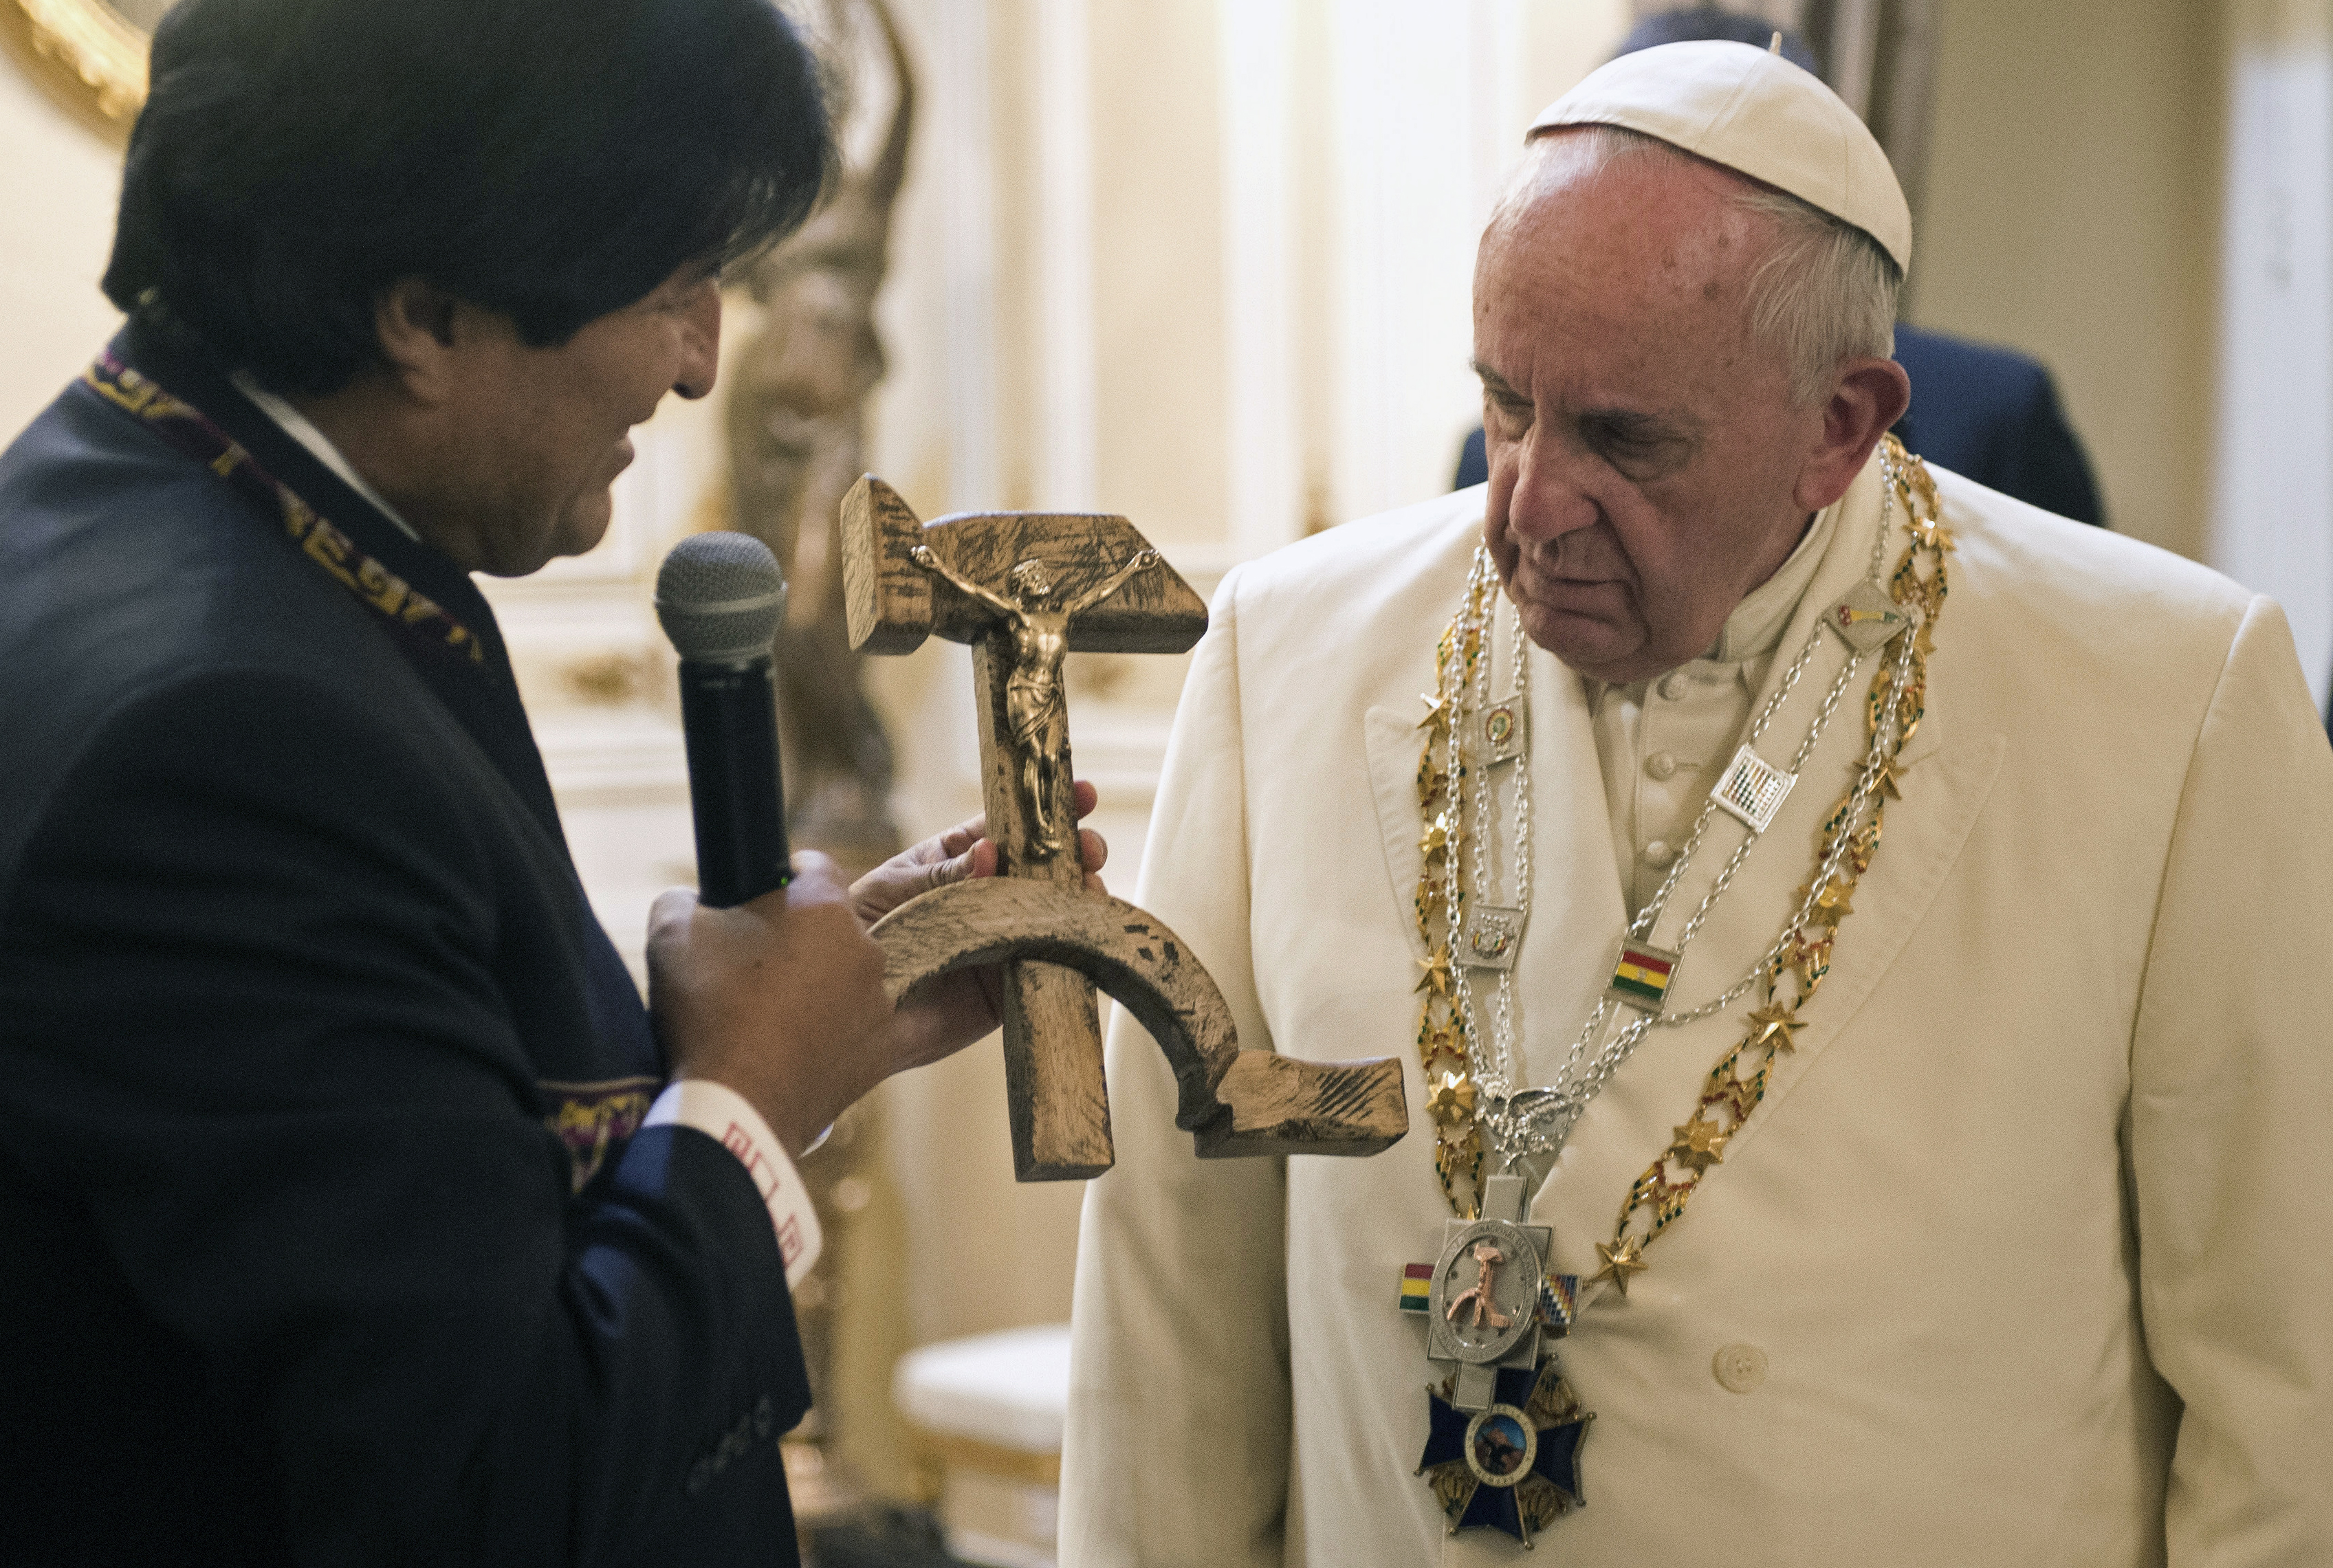 Bolivian President Evo Morales presents Pope Francis with a crucifix carved into a wooden hammer and sickle, in La Paz, Bolivia, on July 8, 2015. (L'Osservatore Romano/AP)